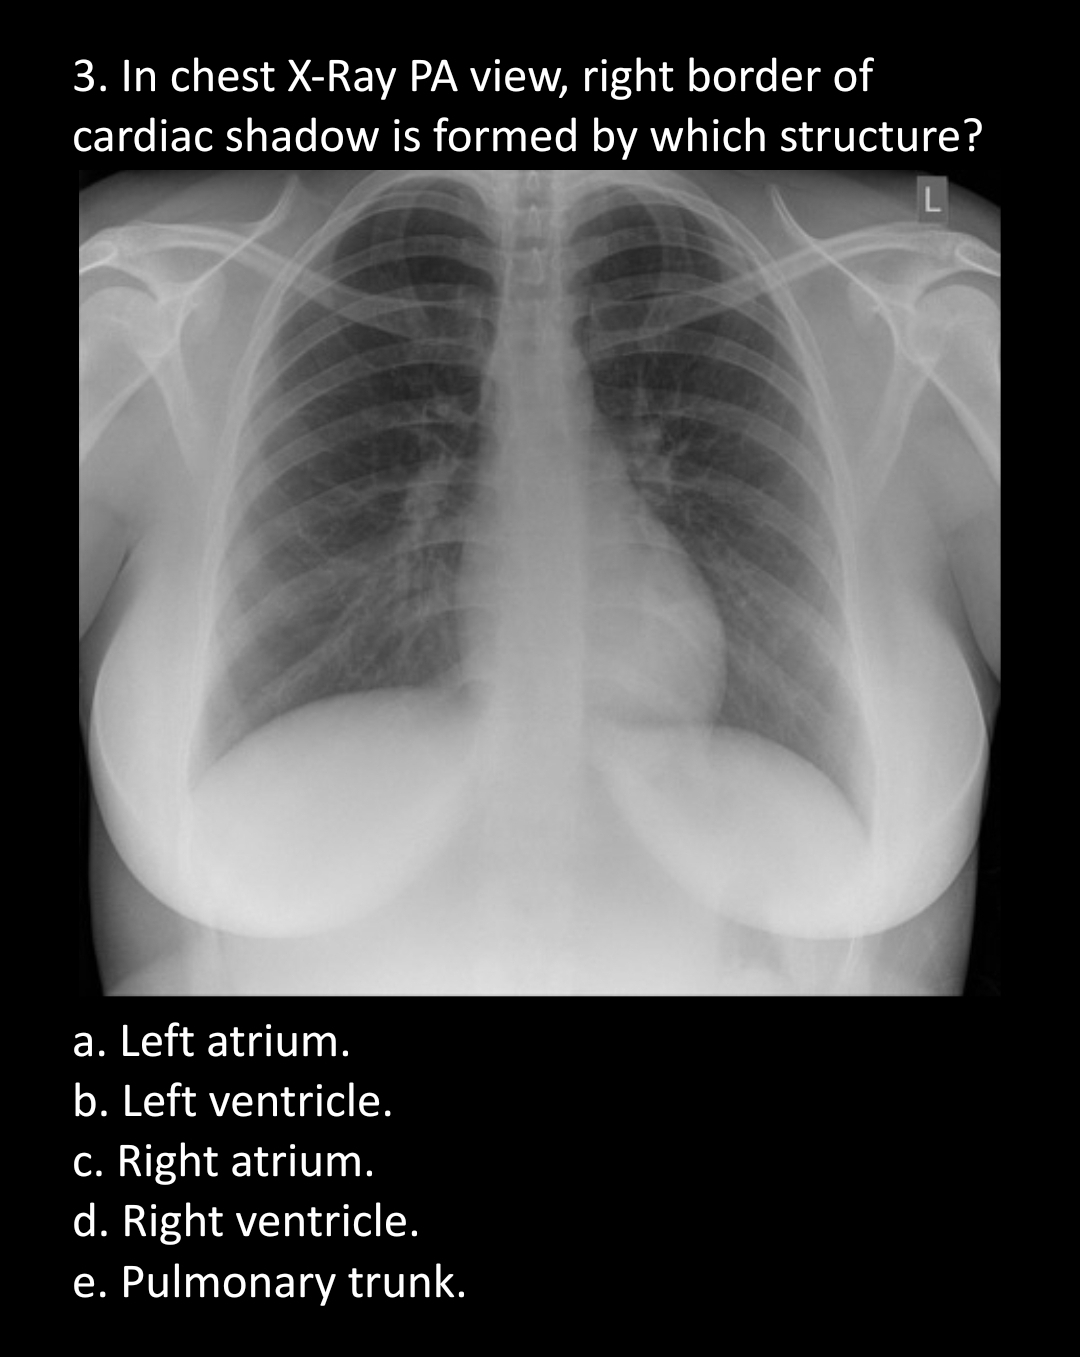 3. In chest X-Ray PA view, right border of
cardiac shadow is formed by which structure?
L
a. Left atrium.
b. Left ventricle.
c. Right atrium.
d. Right ventricle.
e. Pulmonary trunk.